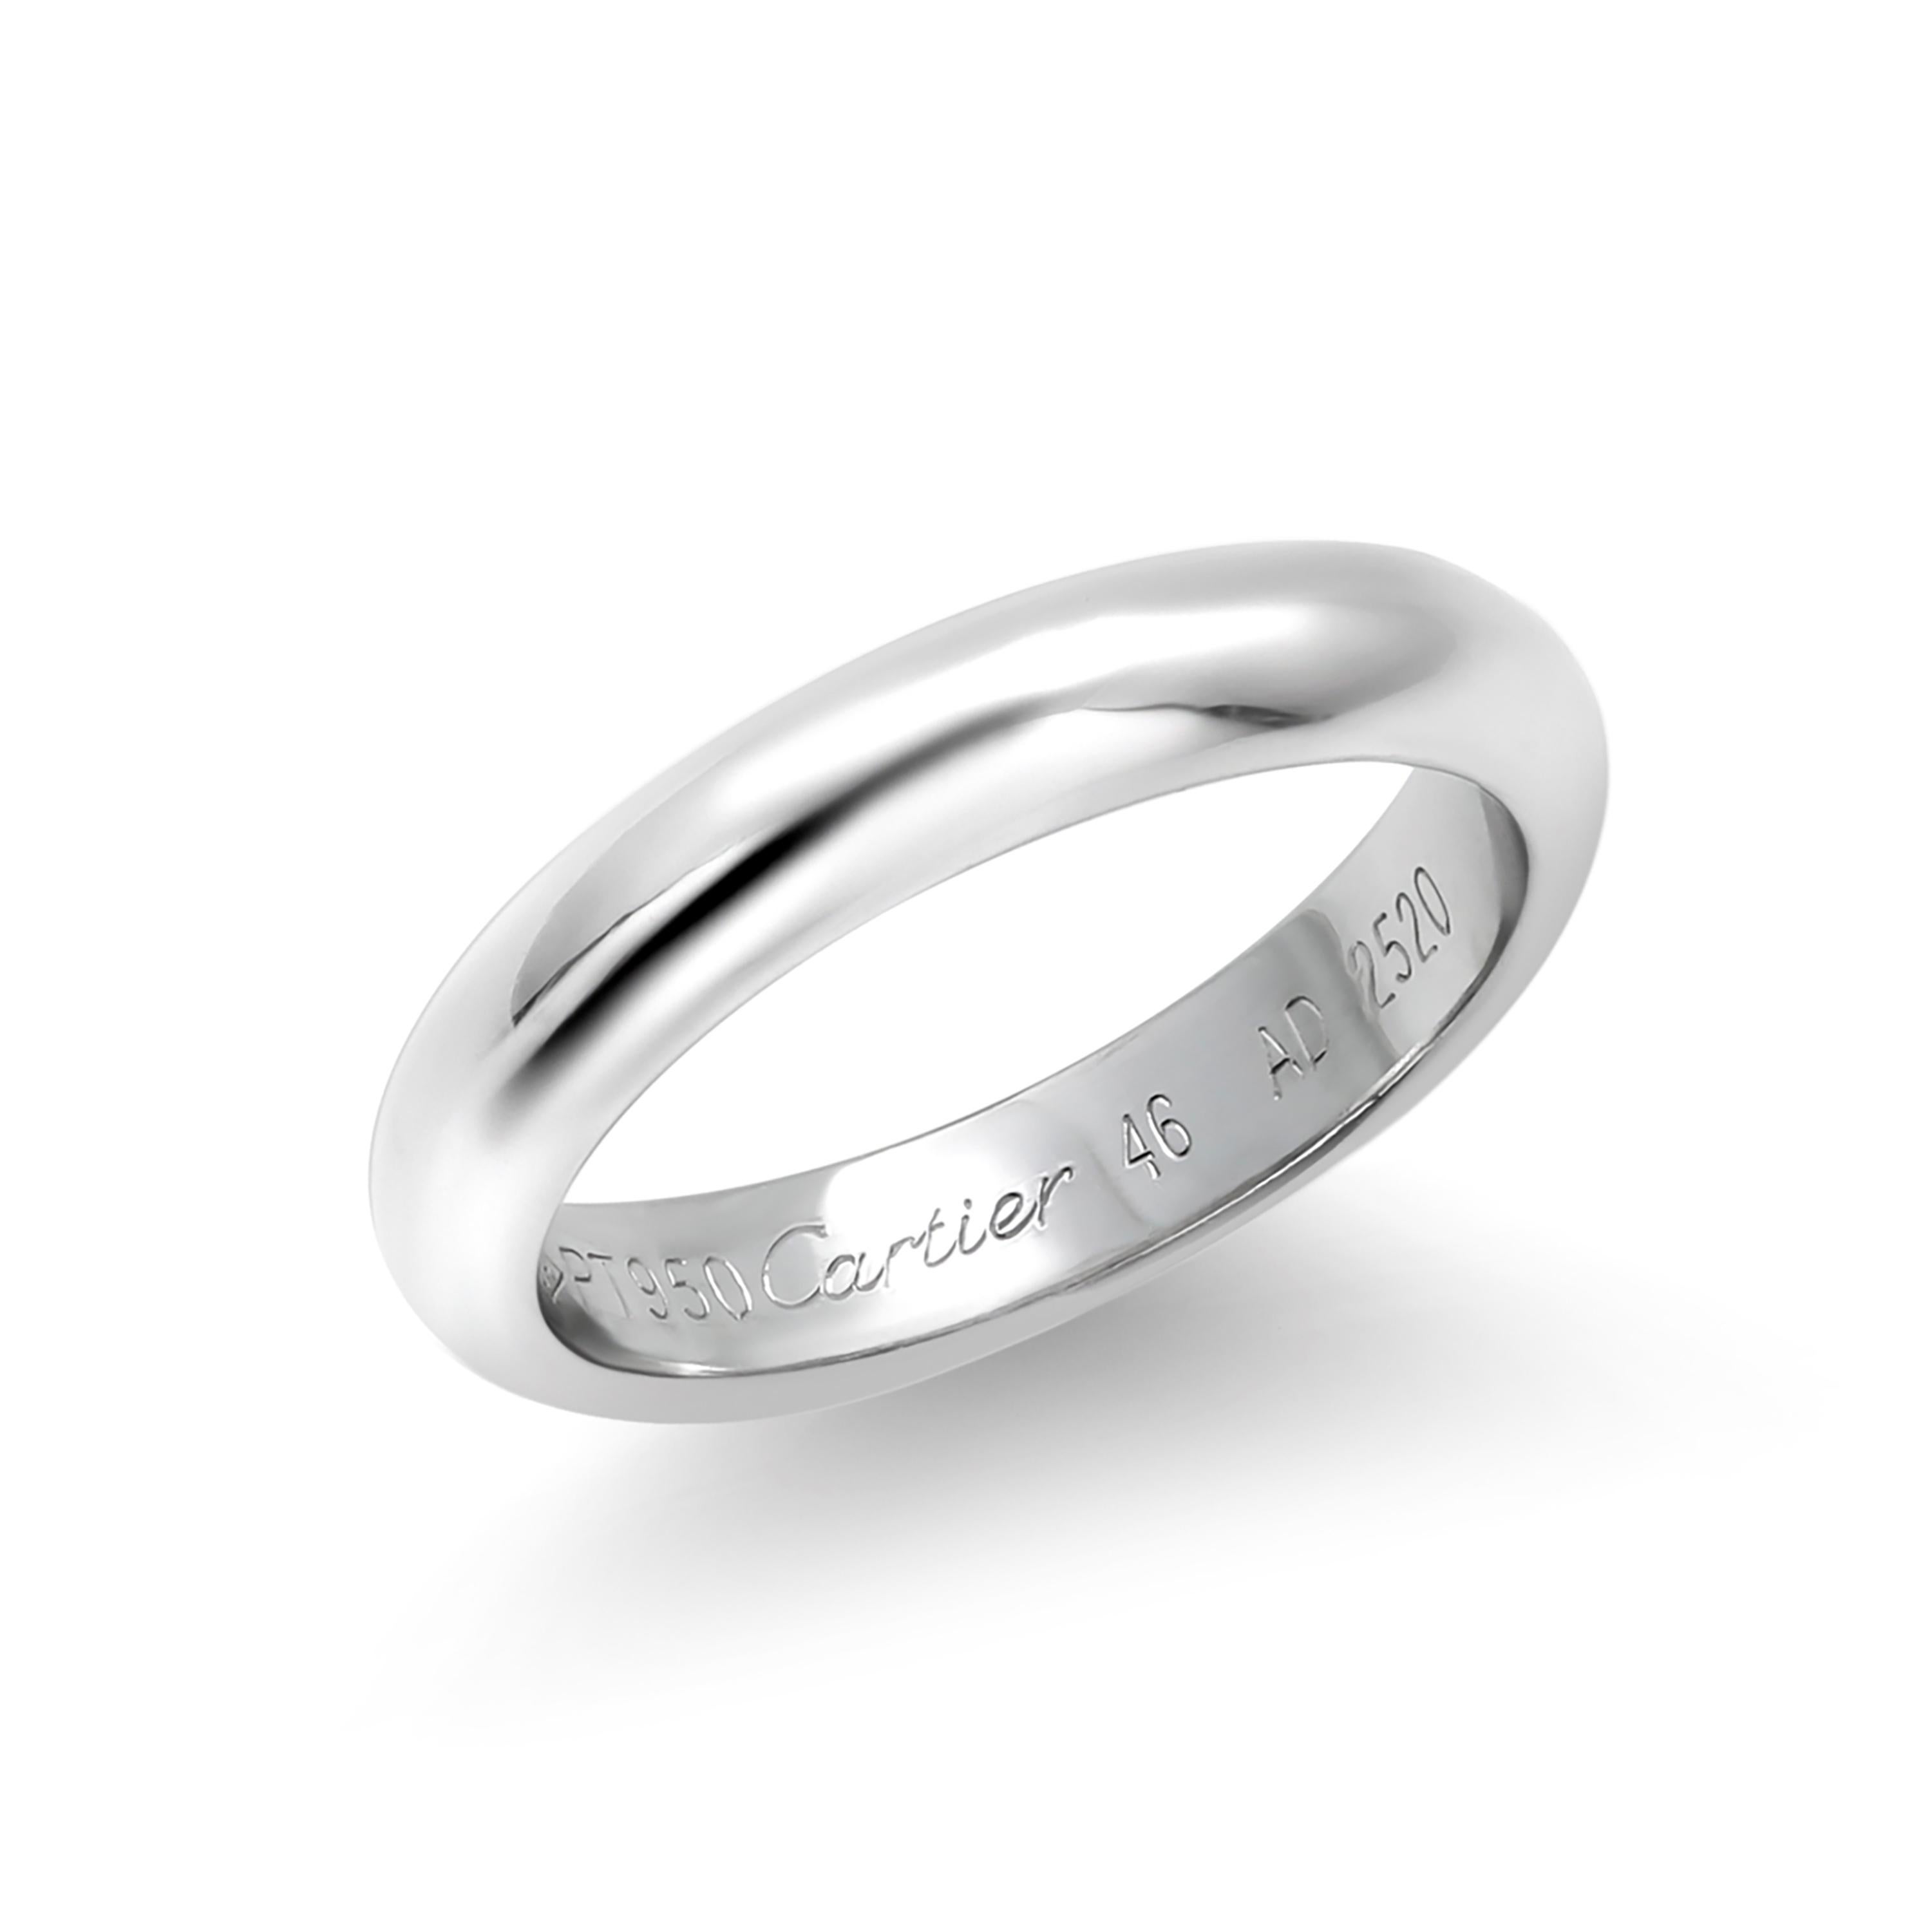 Cartier 1985 Platinum 3.5 Millimeter Wedding Band Size 5.25 Signed Cartier  In Good Condition For Sale In New York, NY